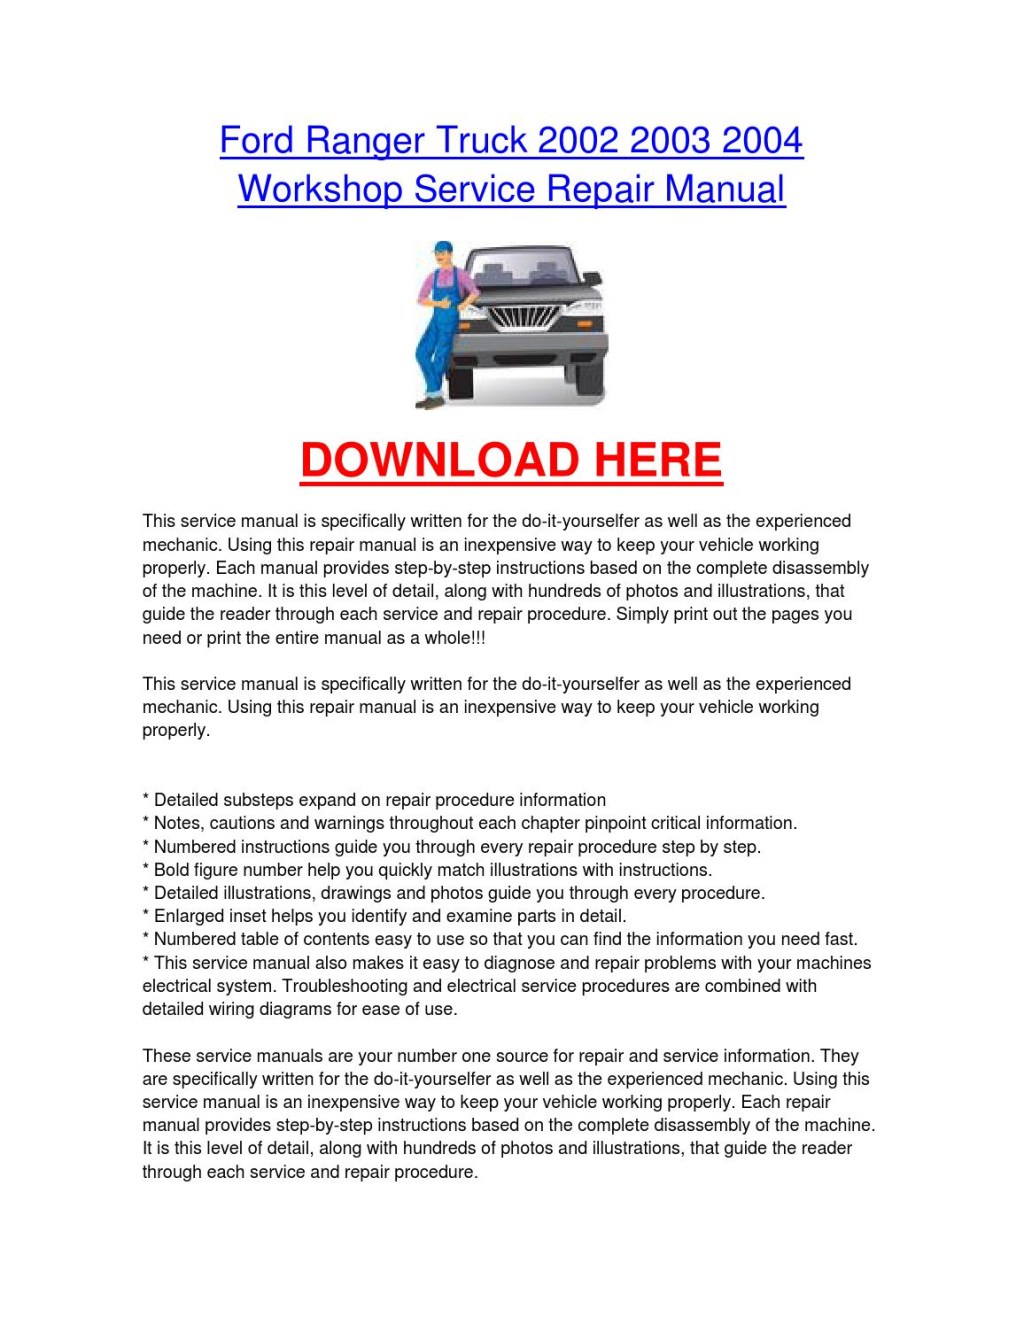 Picture of: Ford ranger truck    workshop car service repair